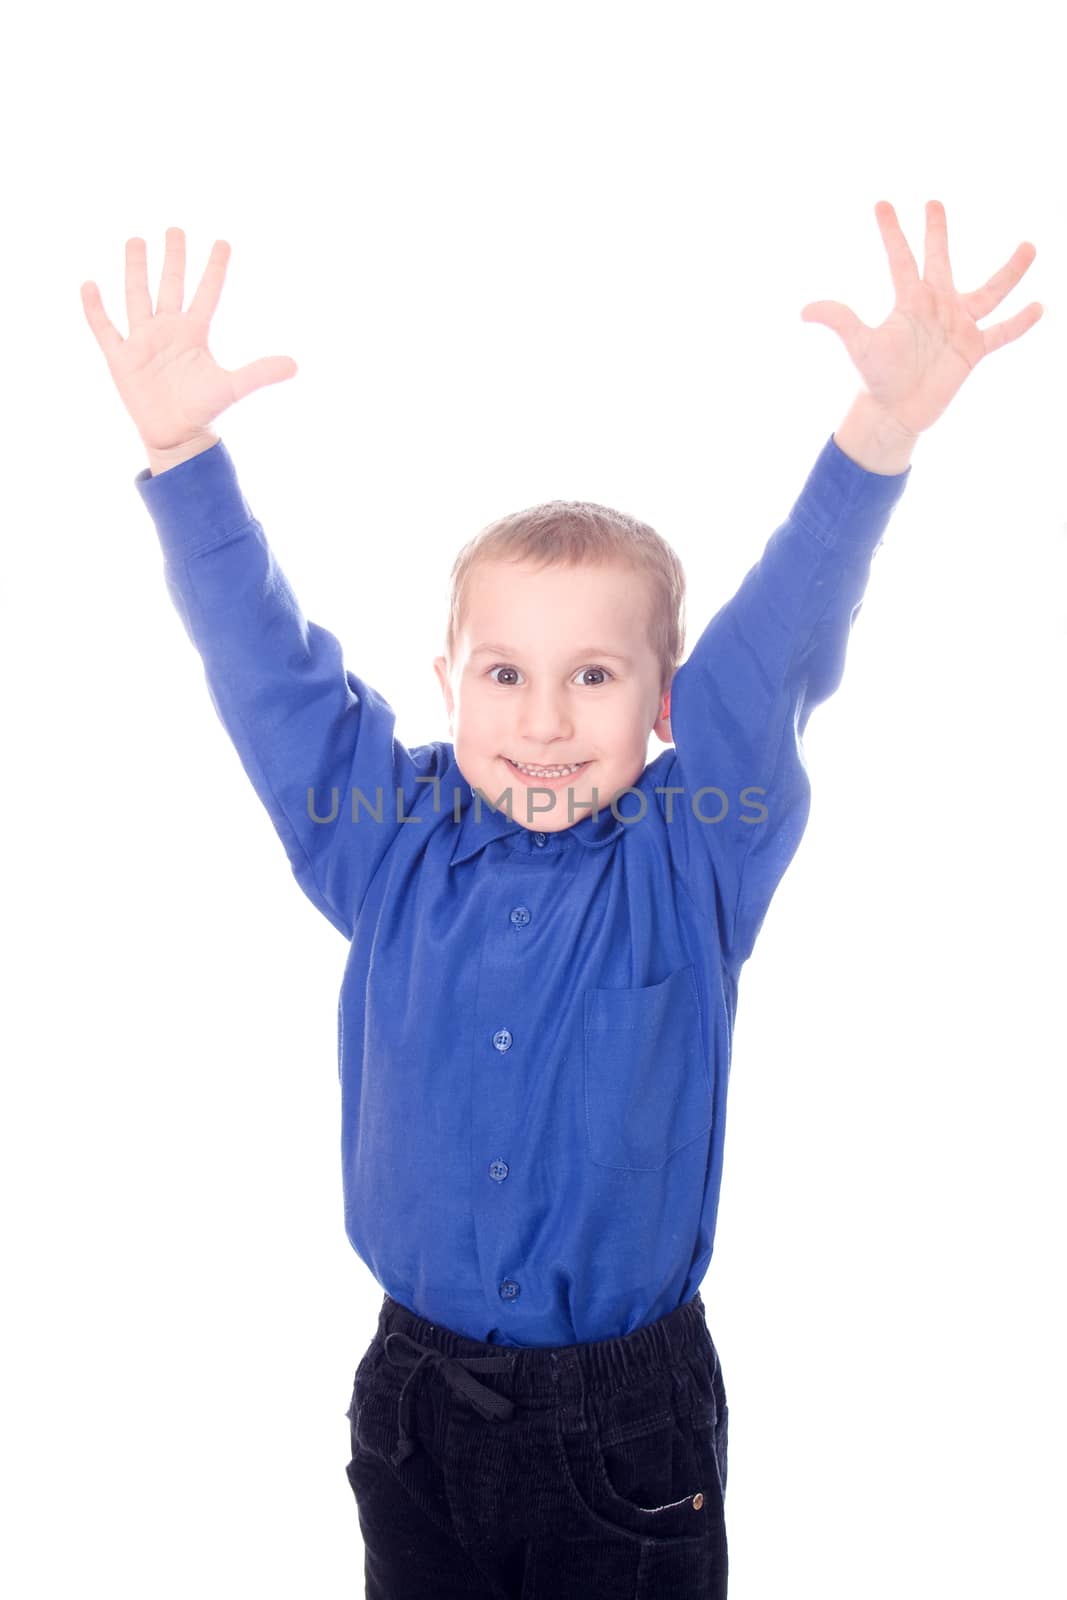 Boy with raised hands